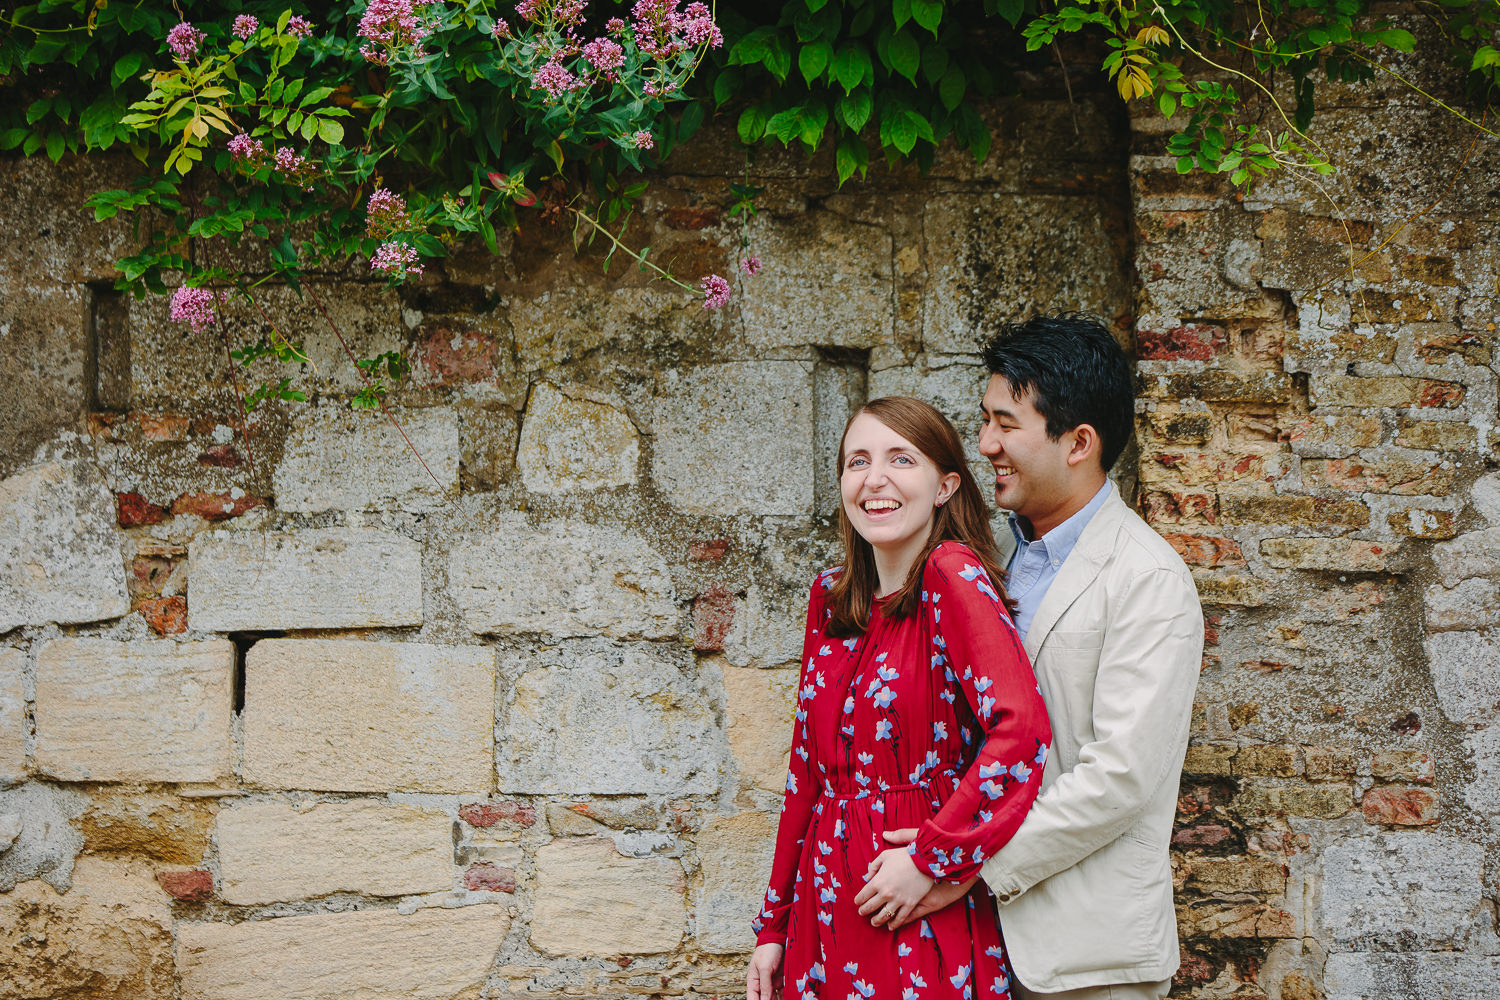 Engaged couple in Ely, photographed by Ely Photographer. Couple standing by a stone wall and pink flowers